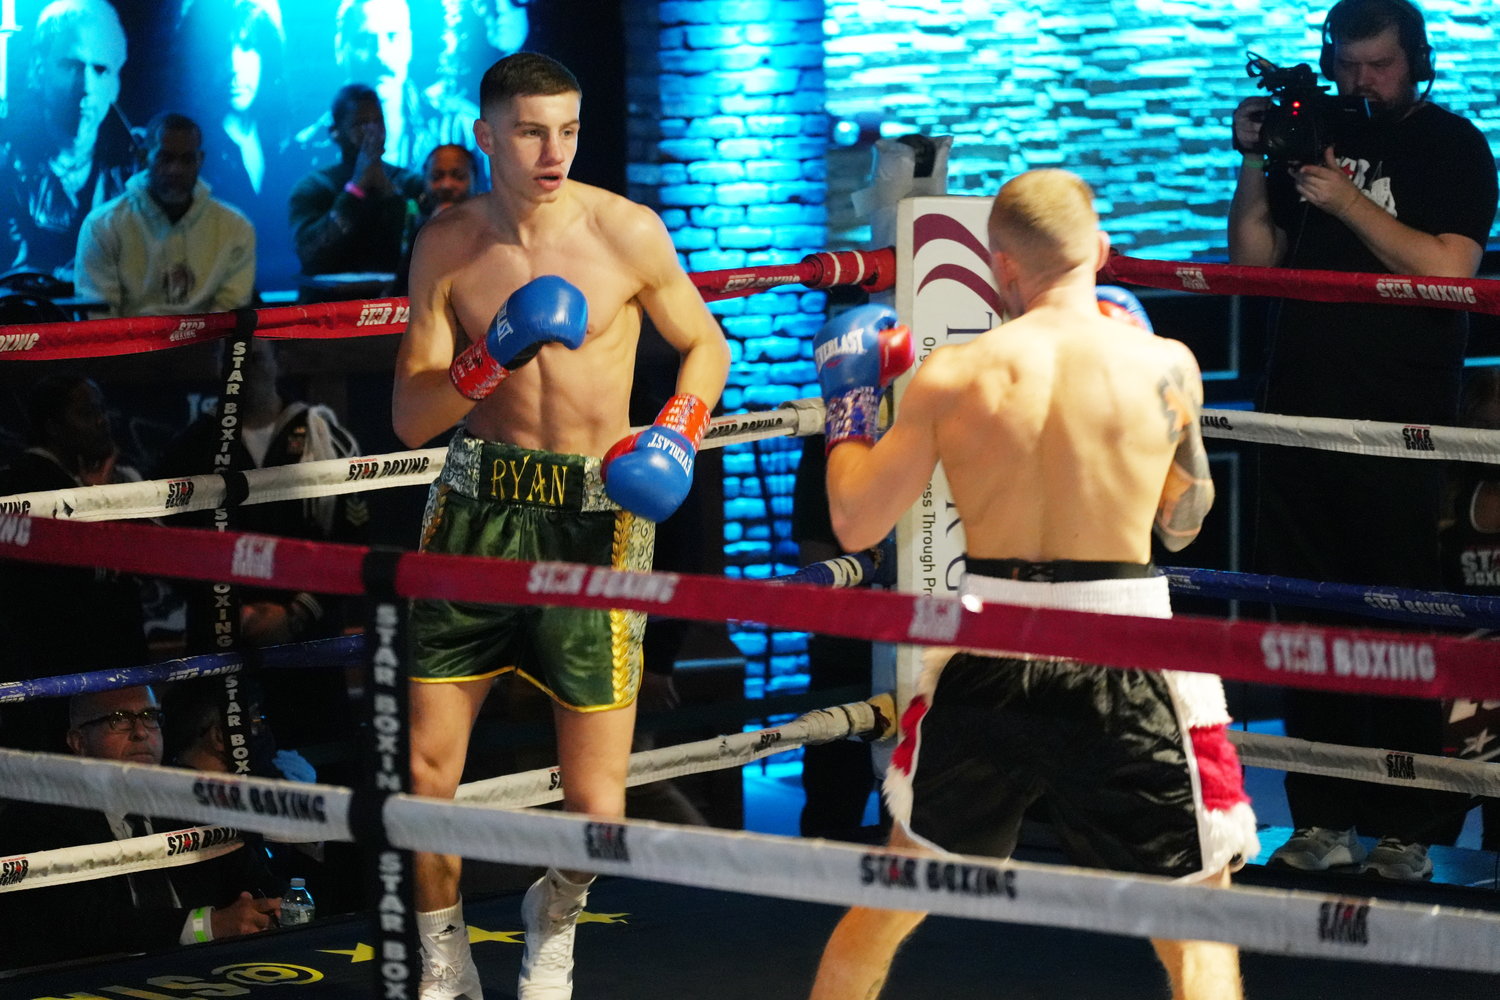 Ryan O’Rourke, left, from Ireland, made his American boxing debut against Andreas Maier, of Germany, last Thursday at Mulcahy’s.